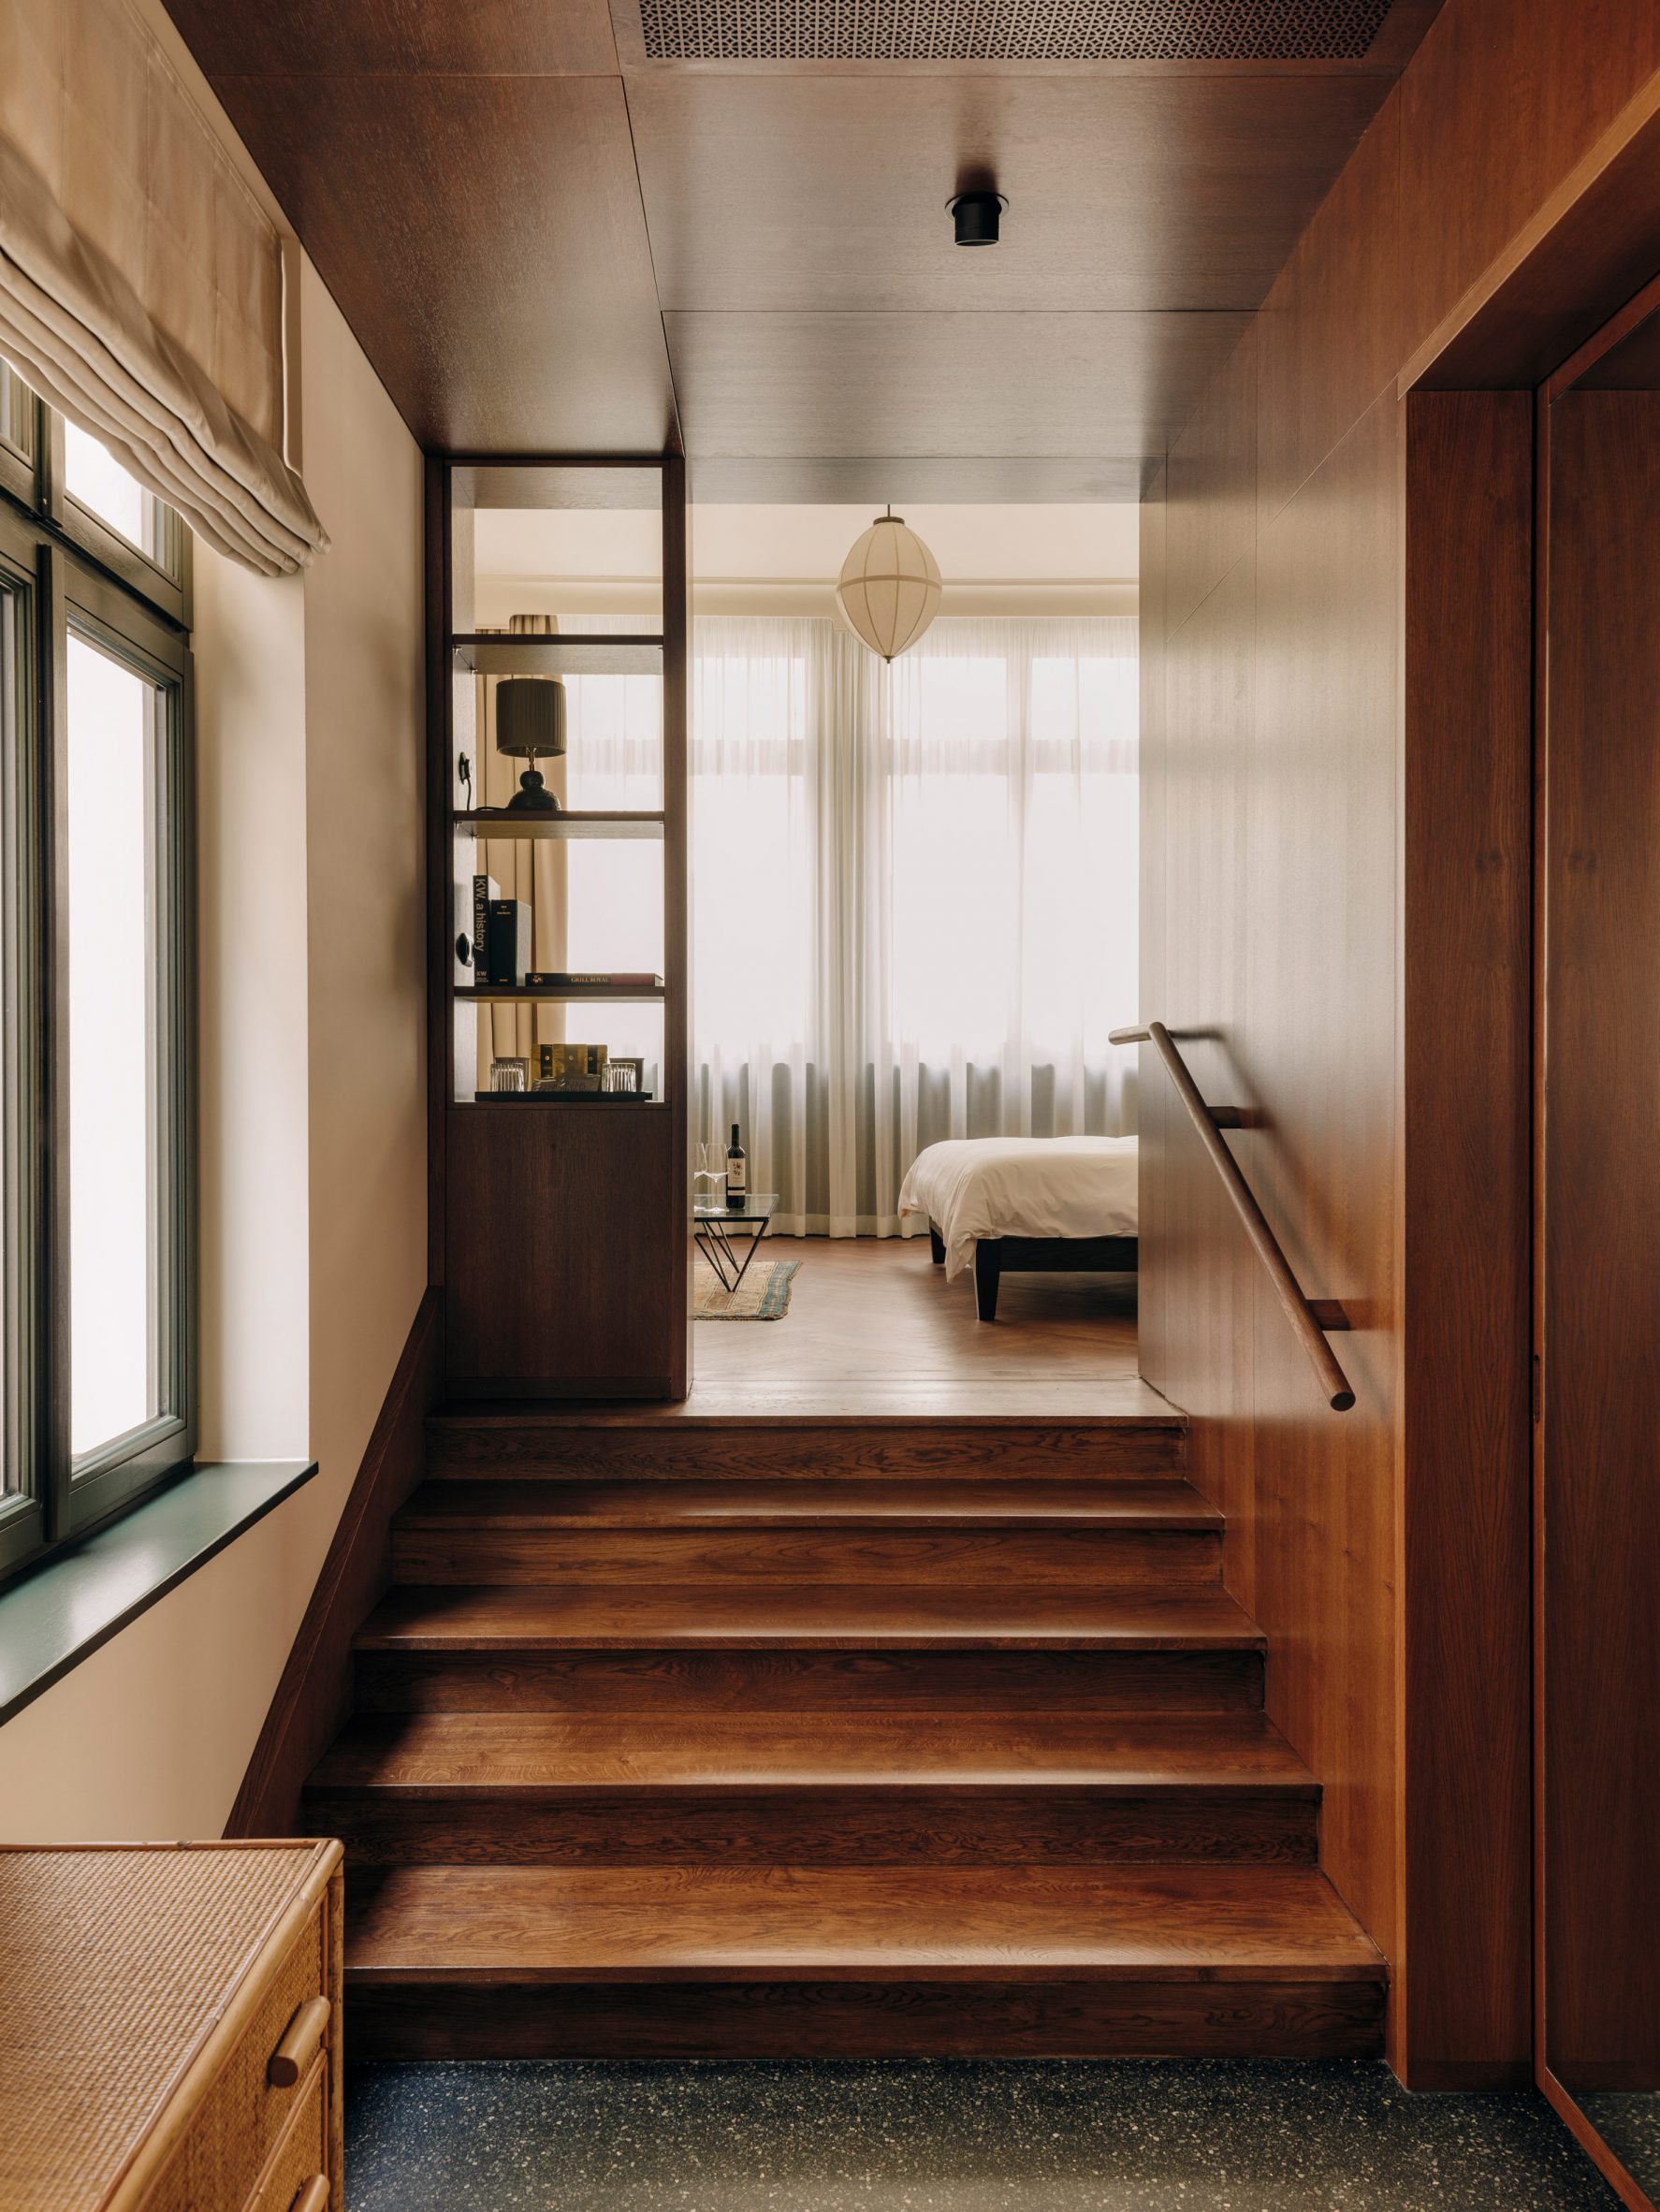 Wooden staircase in guest room of Berlin hotel by Irina Kromayer, Etienne Descloux and Katariina Minits